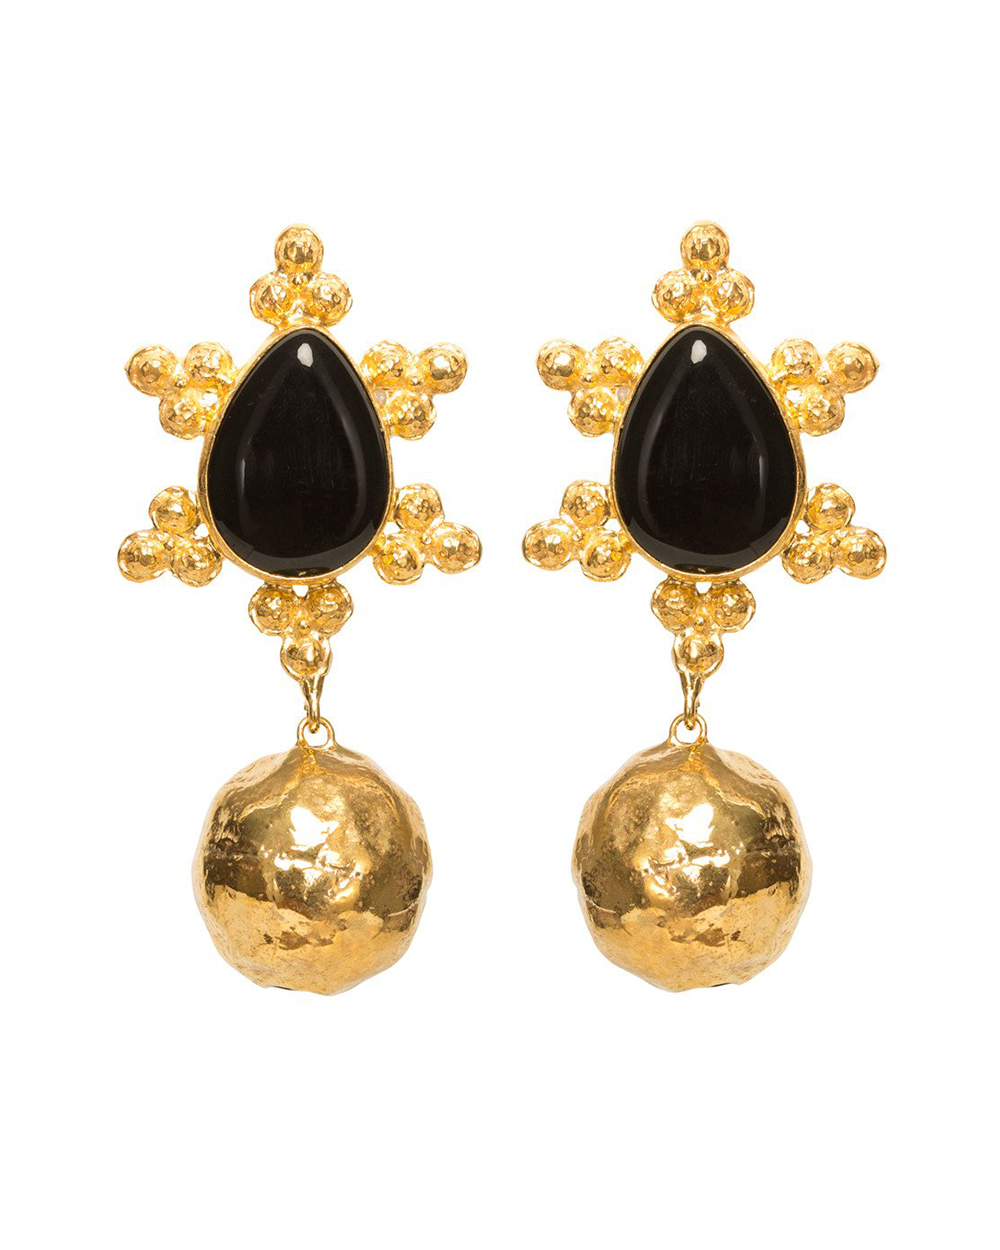 Christie Nicolaides earrings, $246